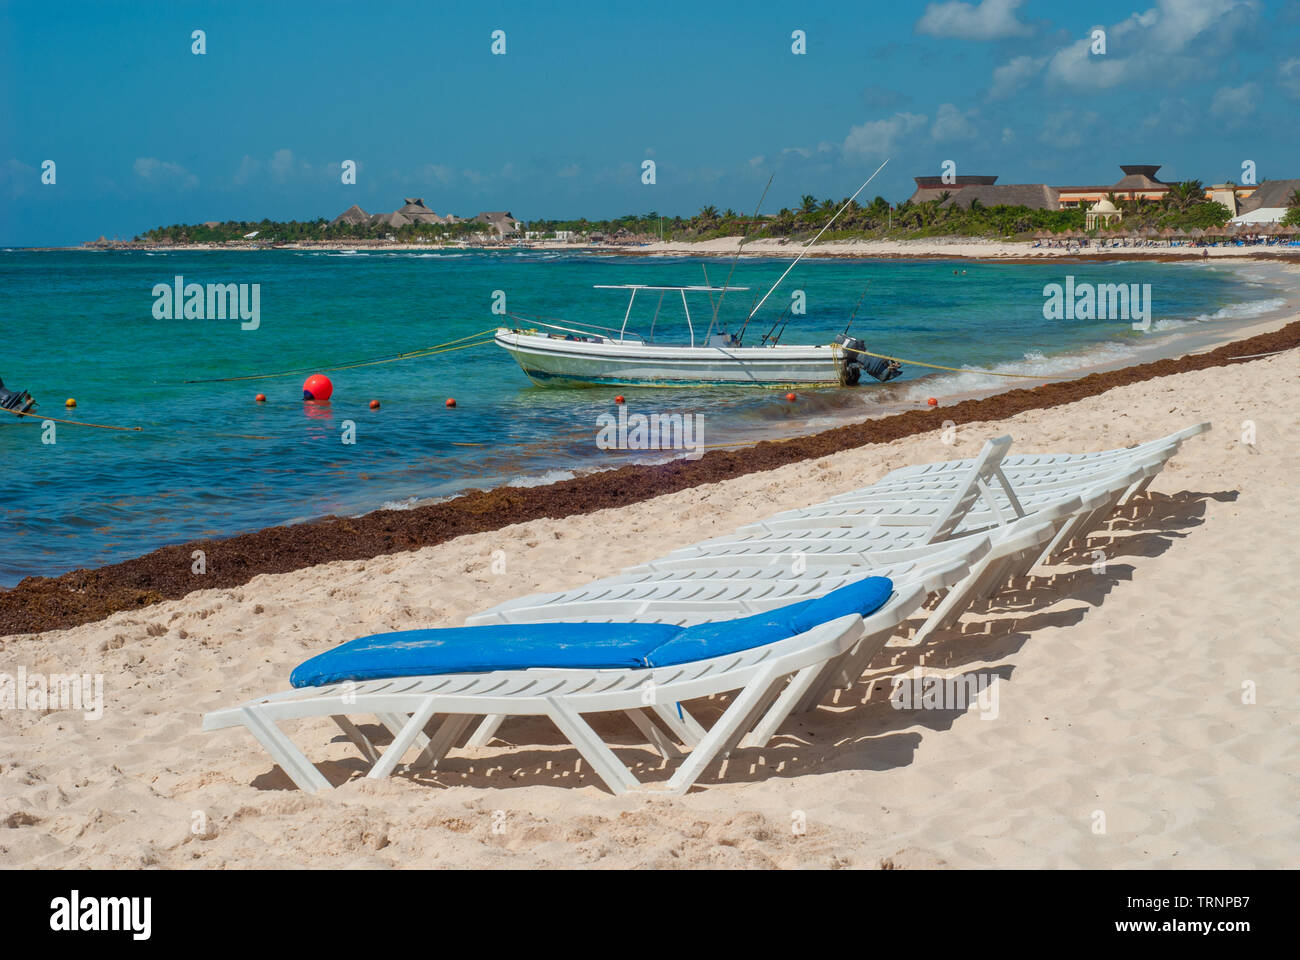 Fishing boat and deckchairs taken on the beach of Tulum, in the Mexican Yucatan peninsula Stock Photo